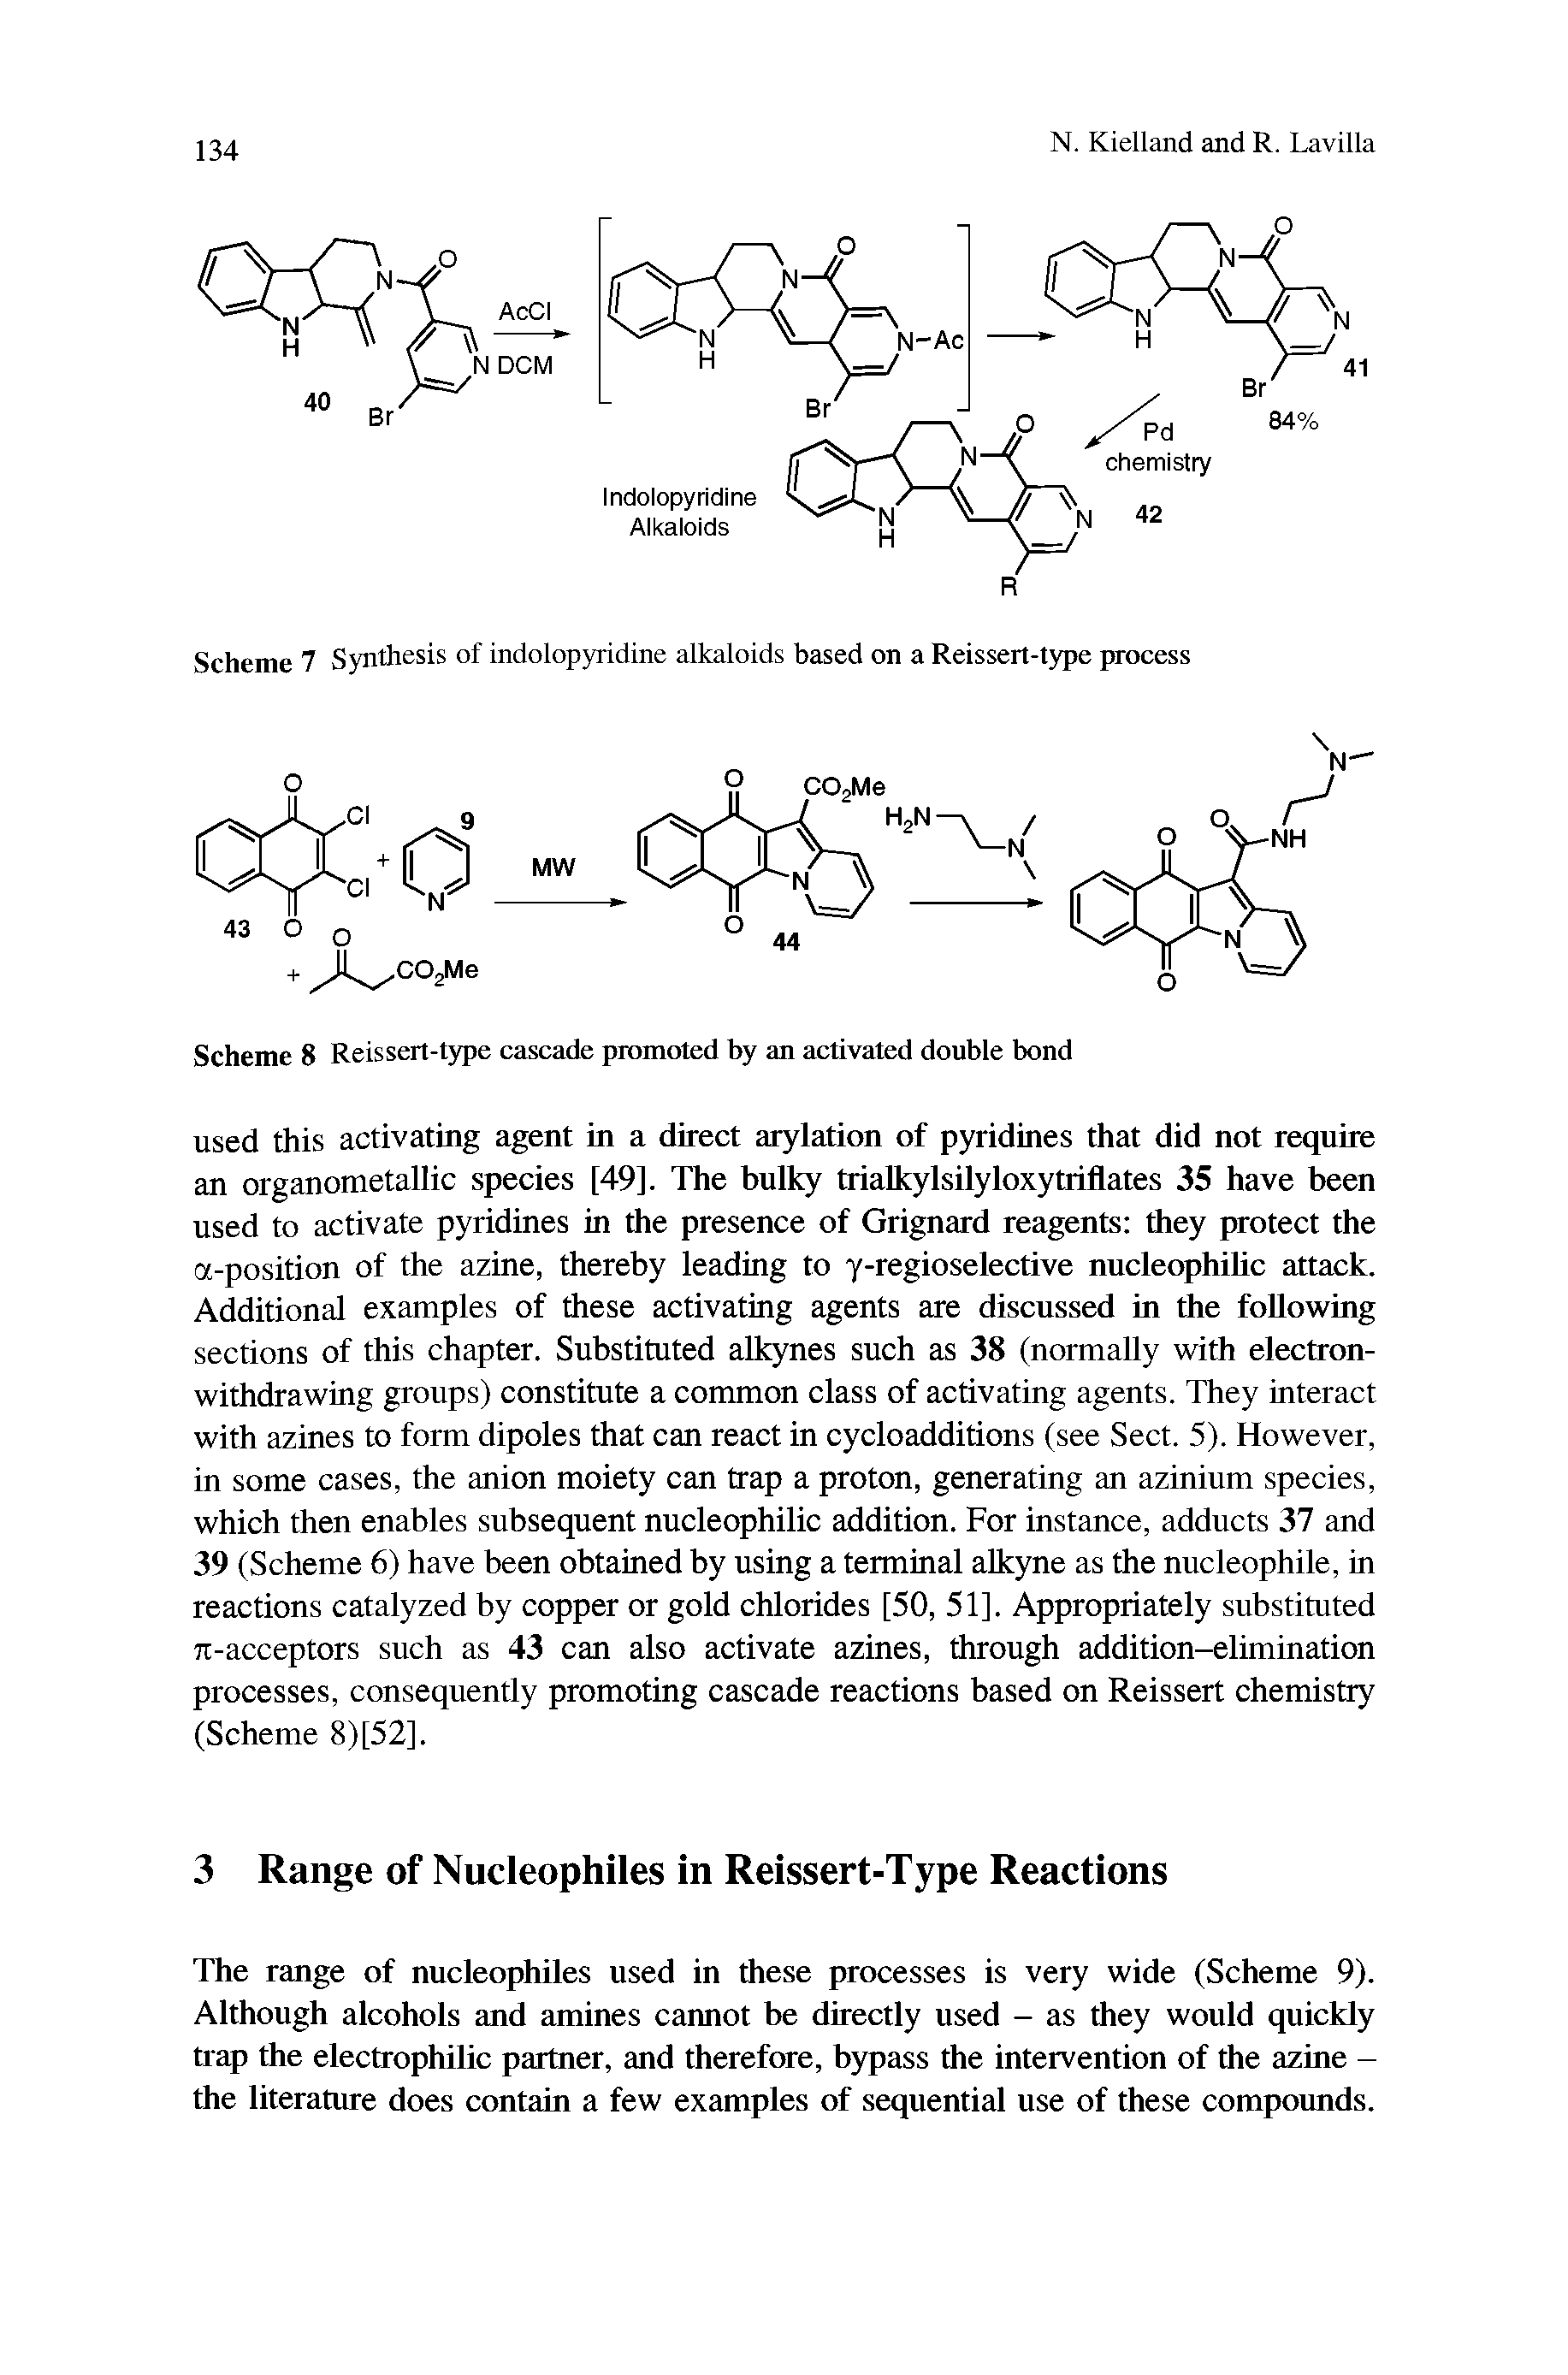 Scheme 7 Synthesis of indolopyridine alkaloids based on a Reissert-type process...